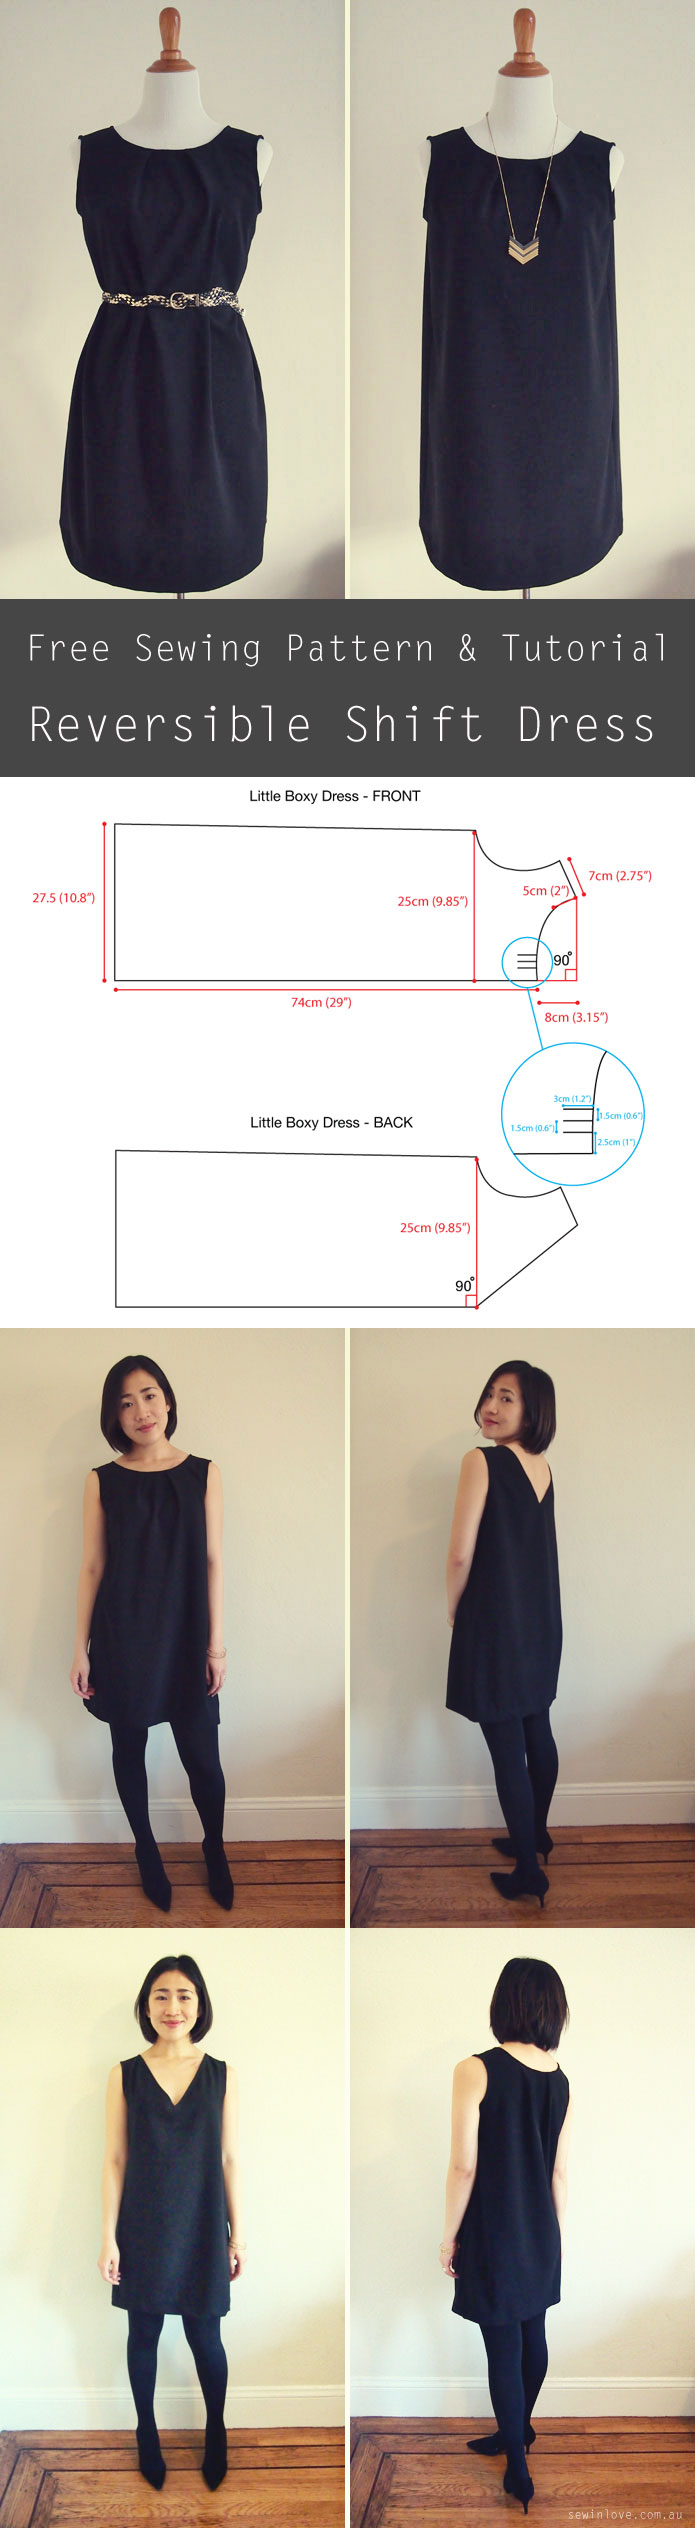 Free Sewing Pattern: Reversible V-neck and Crewneck Shift Dress - Sew